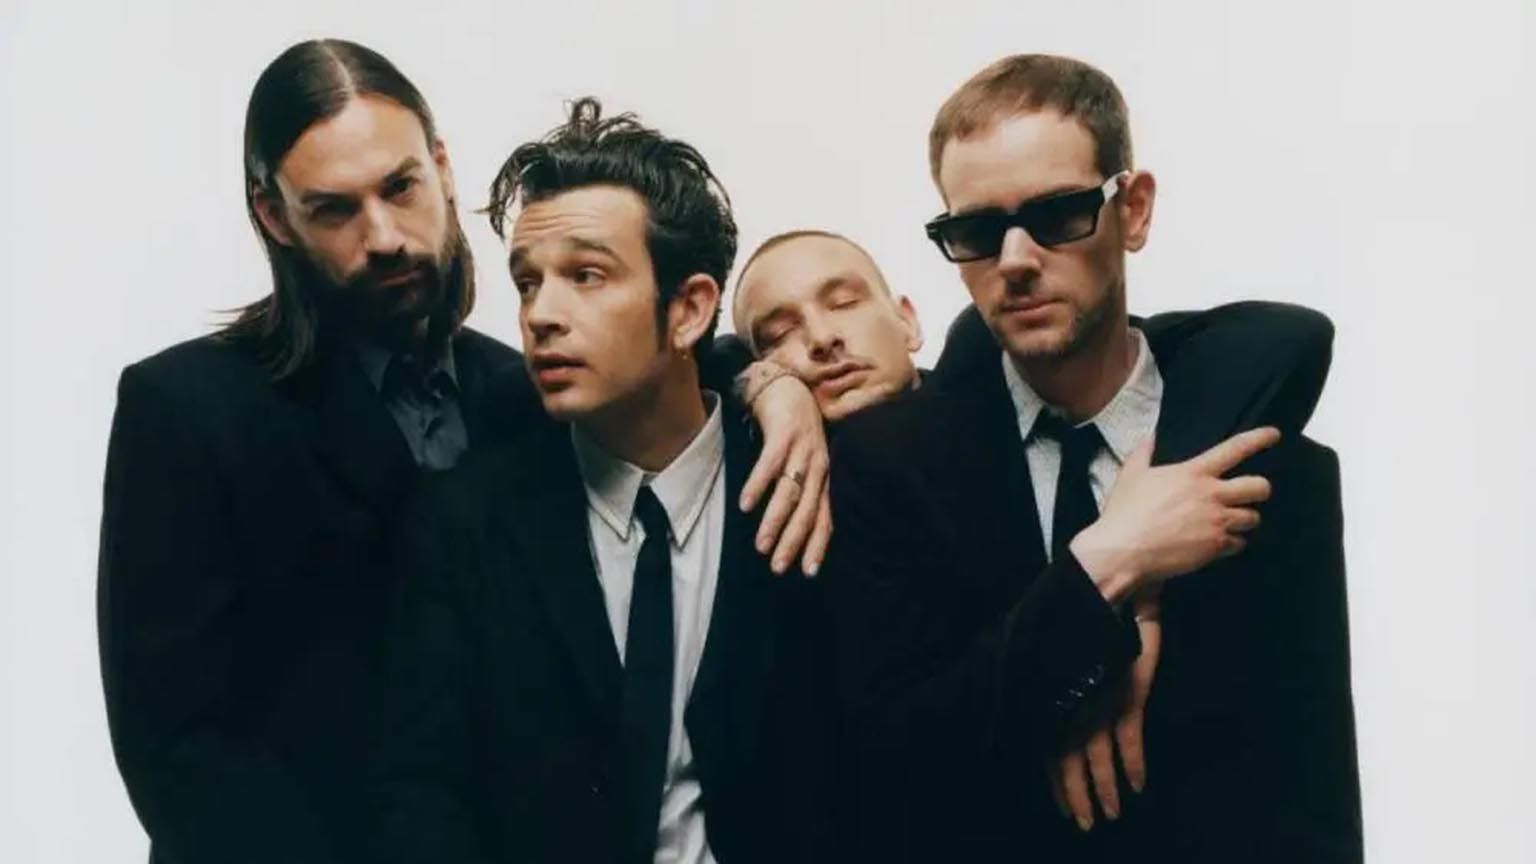 New era for The 1975 as they tease fans with a new album photo Variety